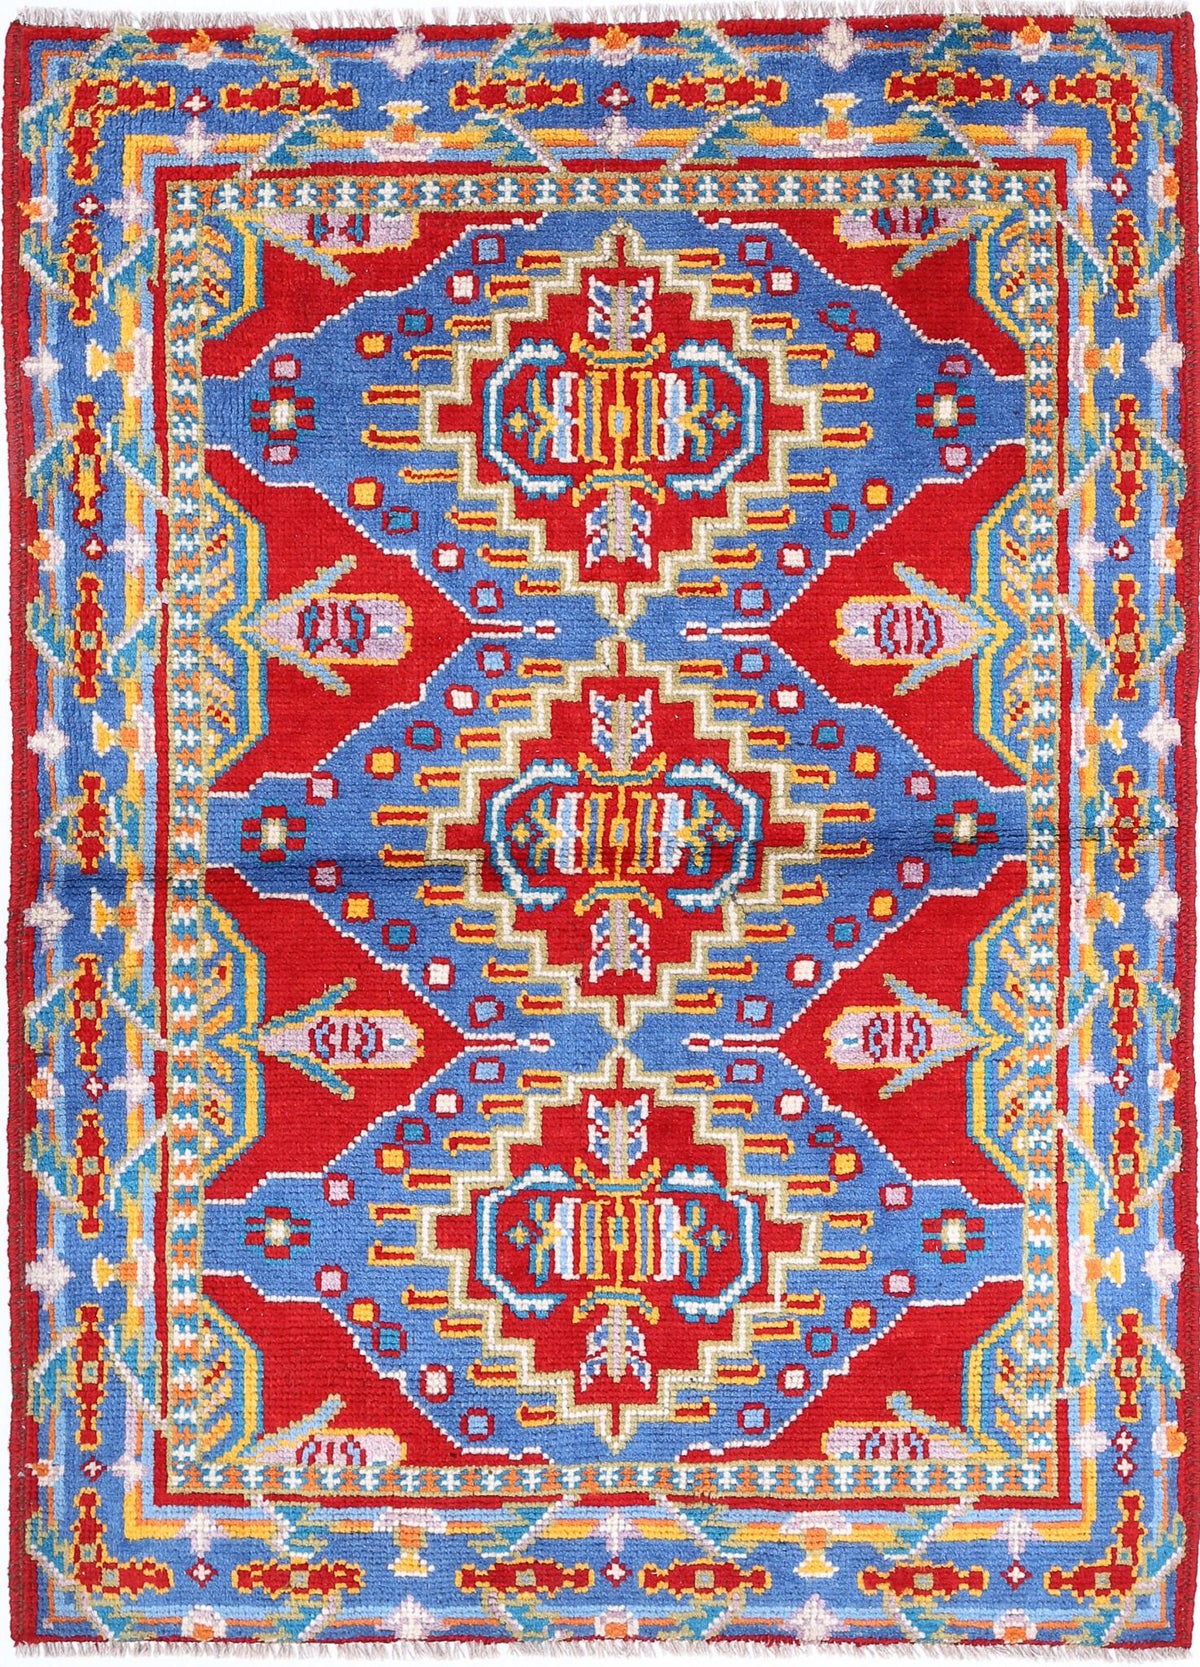 Revival-hand-knotted-qarghani-wool-rug-5014207.jpg